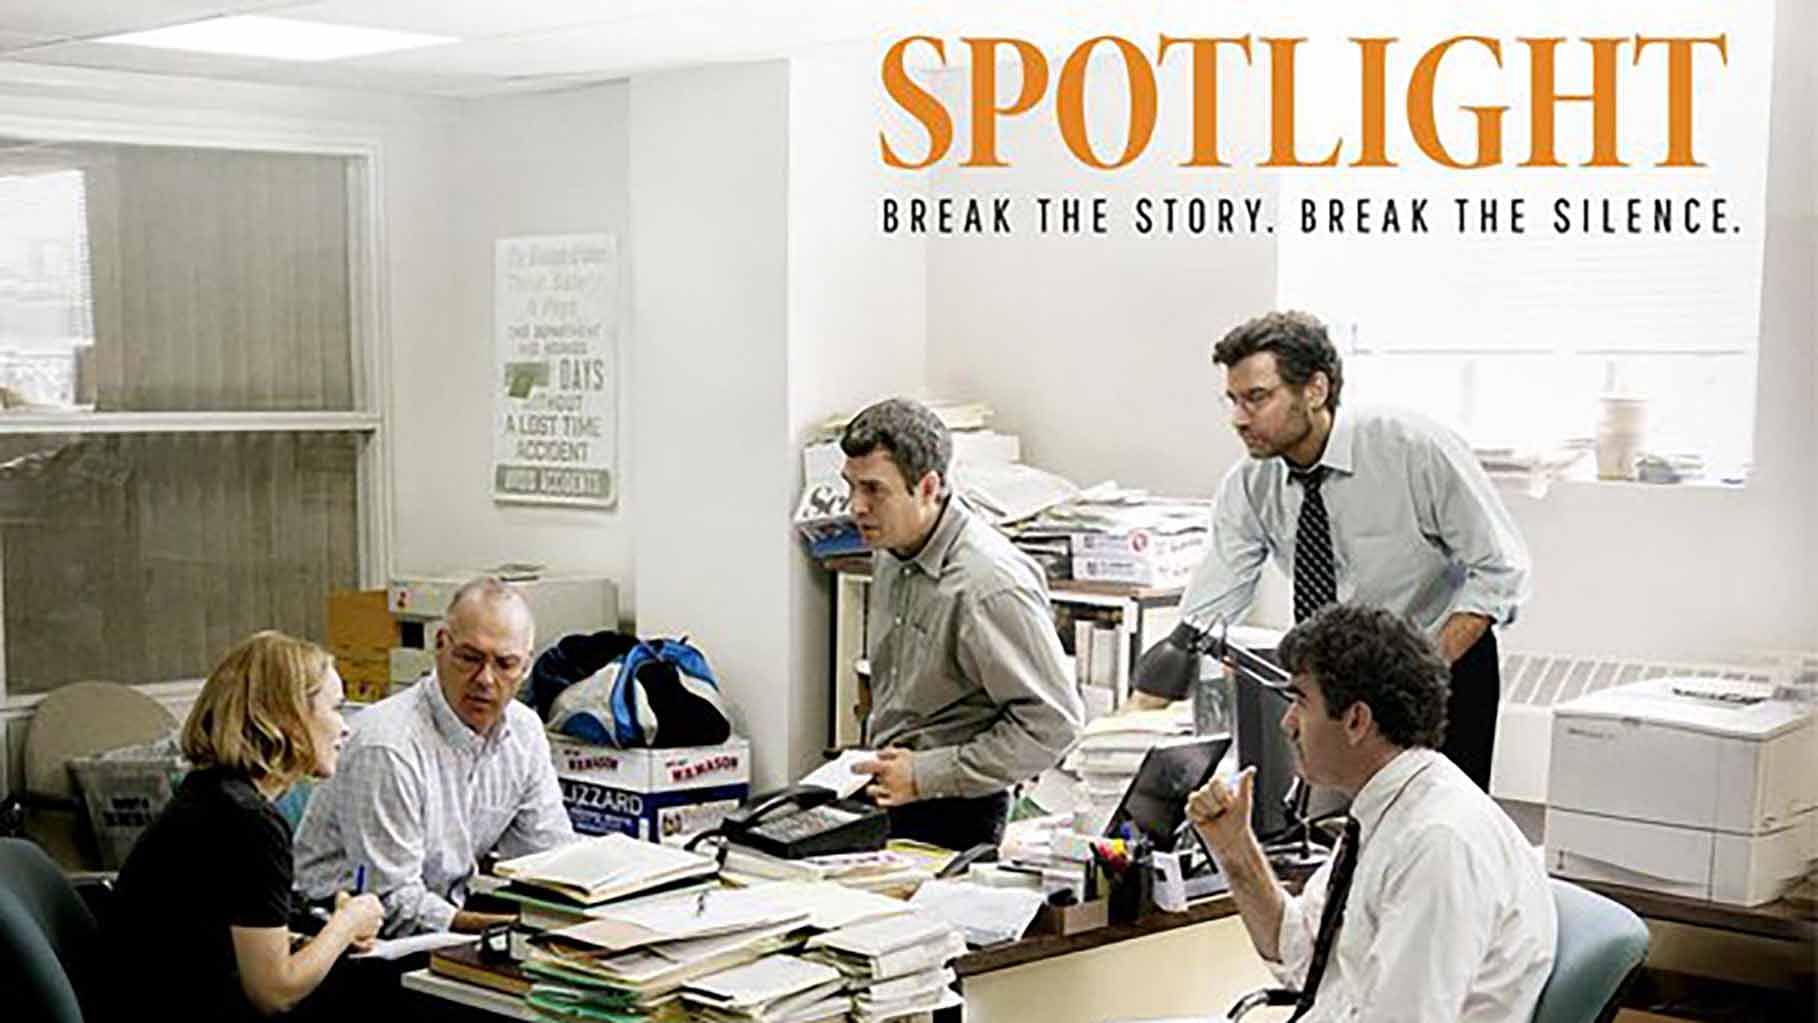 Spotlight won the award for Best Picture at the Oscars. (Photo: <a href="https://twitter.com/Participant/status/704169224759959554">Twitter</a>)